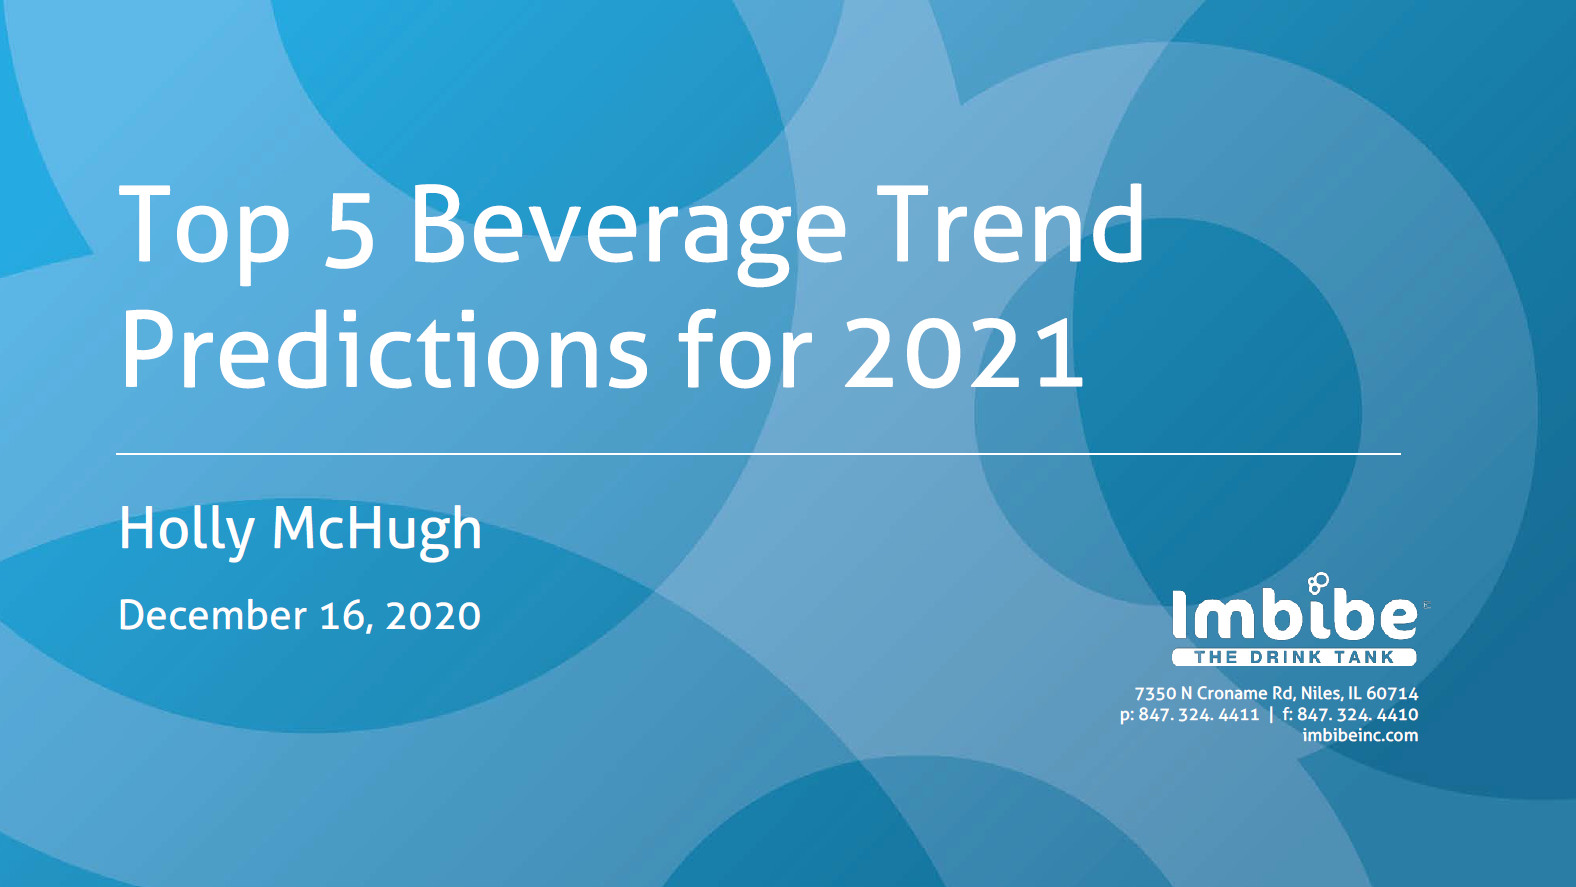 Top 5 Beverage Trend Predictions for 2021